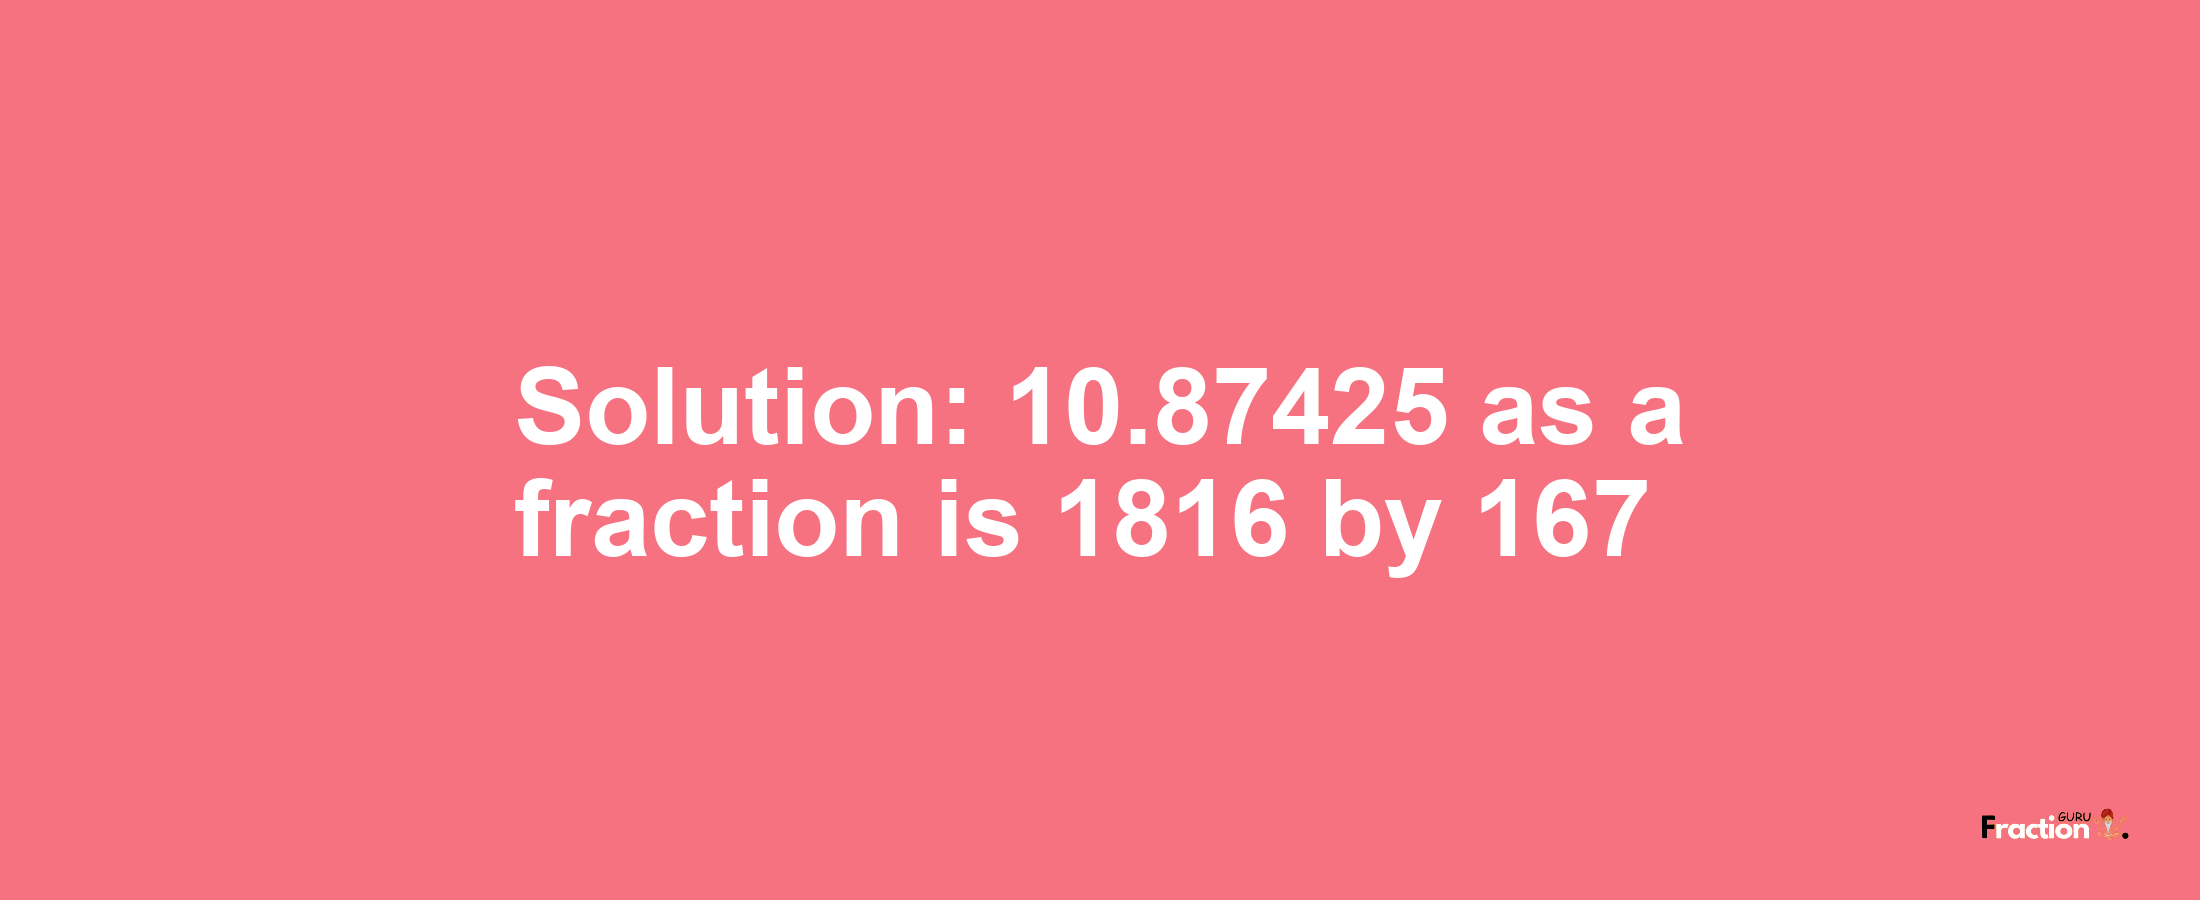 Solution:10.87425 as a fraction is 1816/167